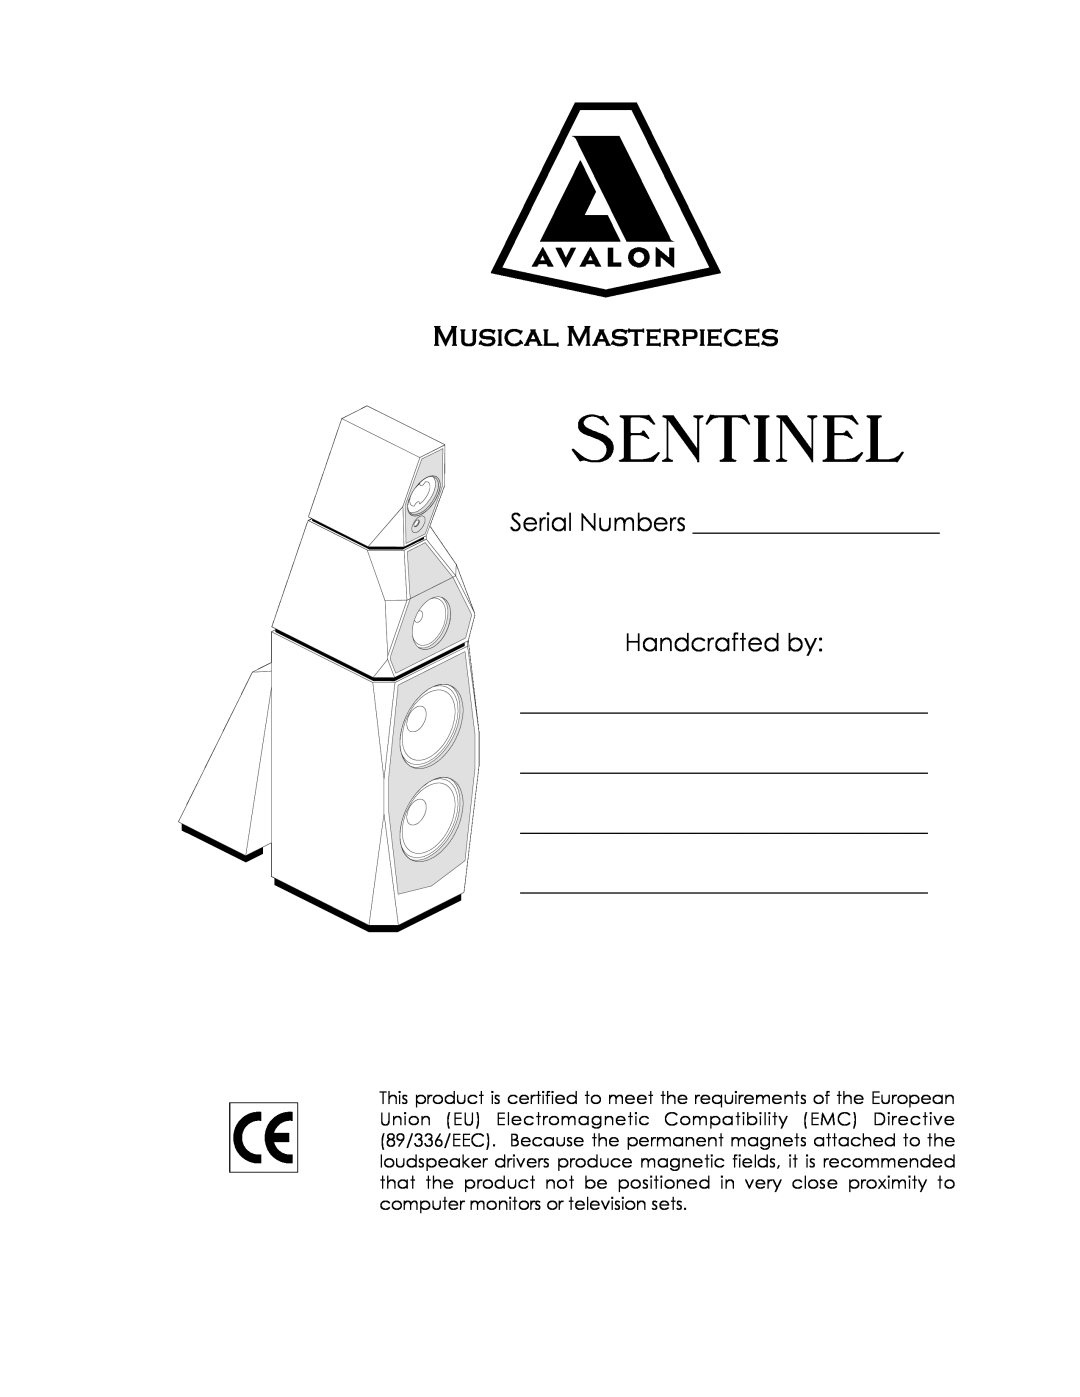 Avalon Acoustics Sentinel manual Musical Masterpieces, Serial Numbers, Handcrafted by 